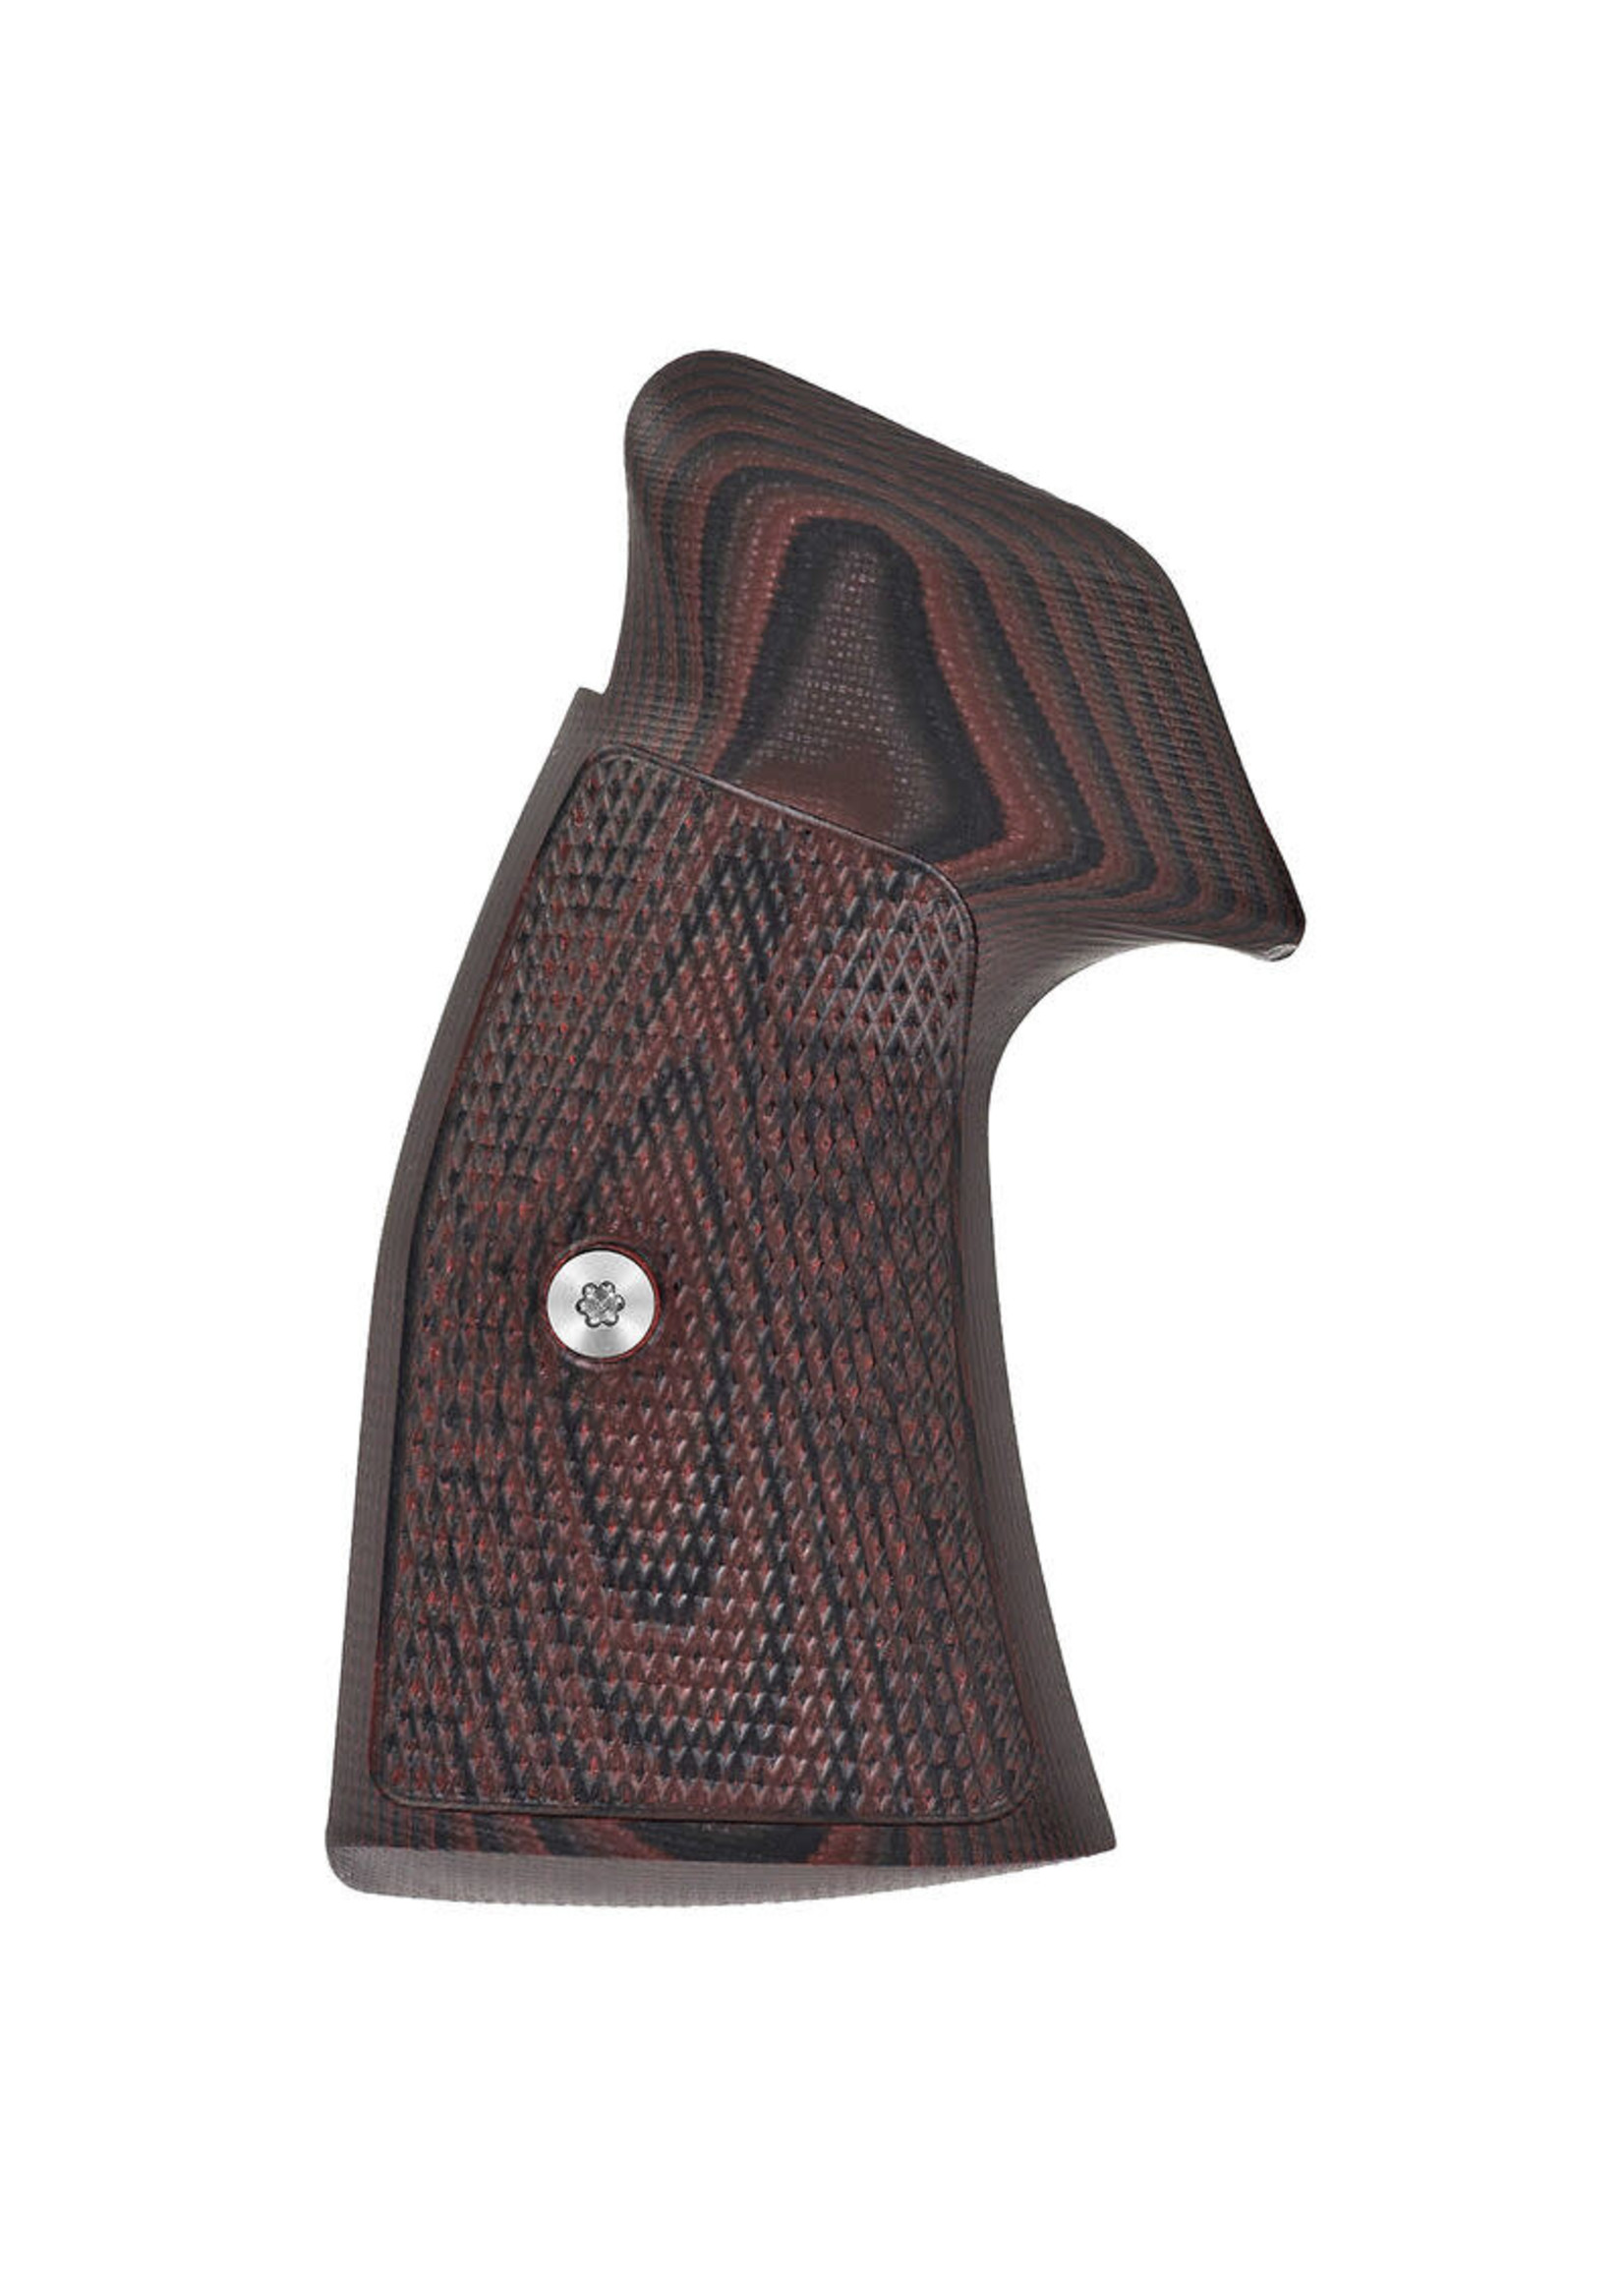 VZ GRIPS TACTICAL DIAMOND G10 GRIPS FOR SMITH & WESSON K L FRAME BLACK CHERRY